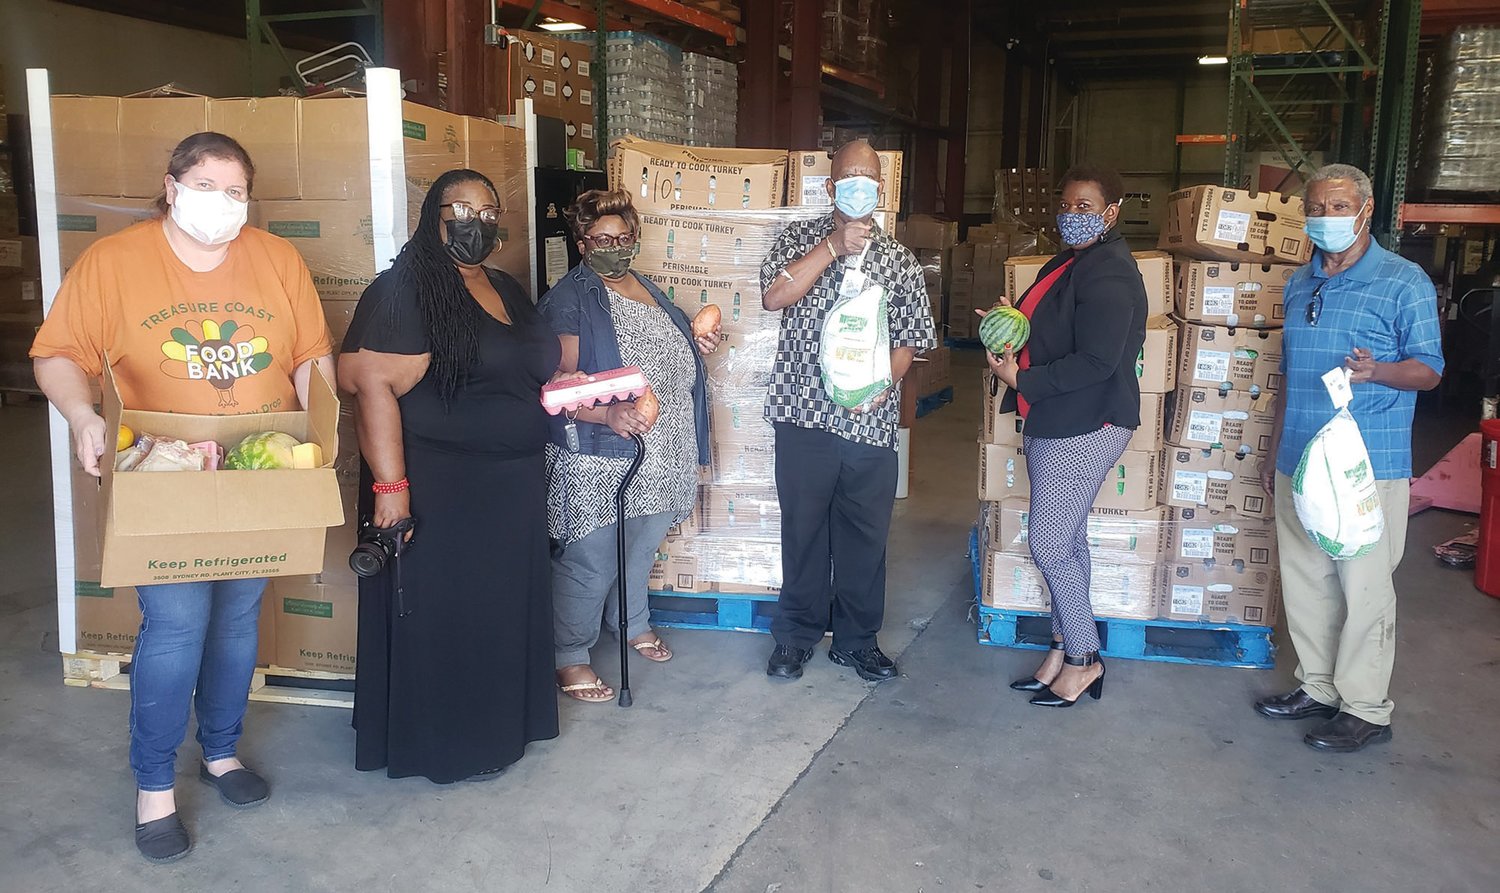 Pictured are: Erin Cox, Chief Operations Officer at Treasure Coast Food Bank; Michelle Irons, Caribbean American Cultural Group Assistant Secretary; Fiona Williams, Vice President and Co-Chair of the Benevolence Committee; Karl Godfrey; Dawn Bloomfield, President; and Neville Lake, Past President.